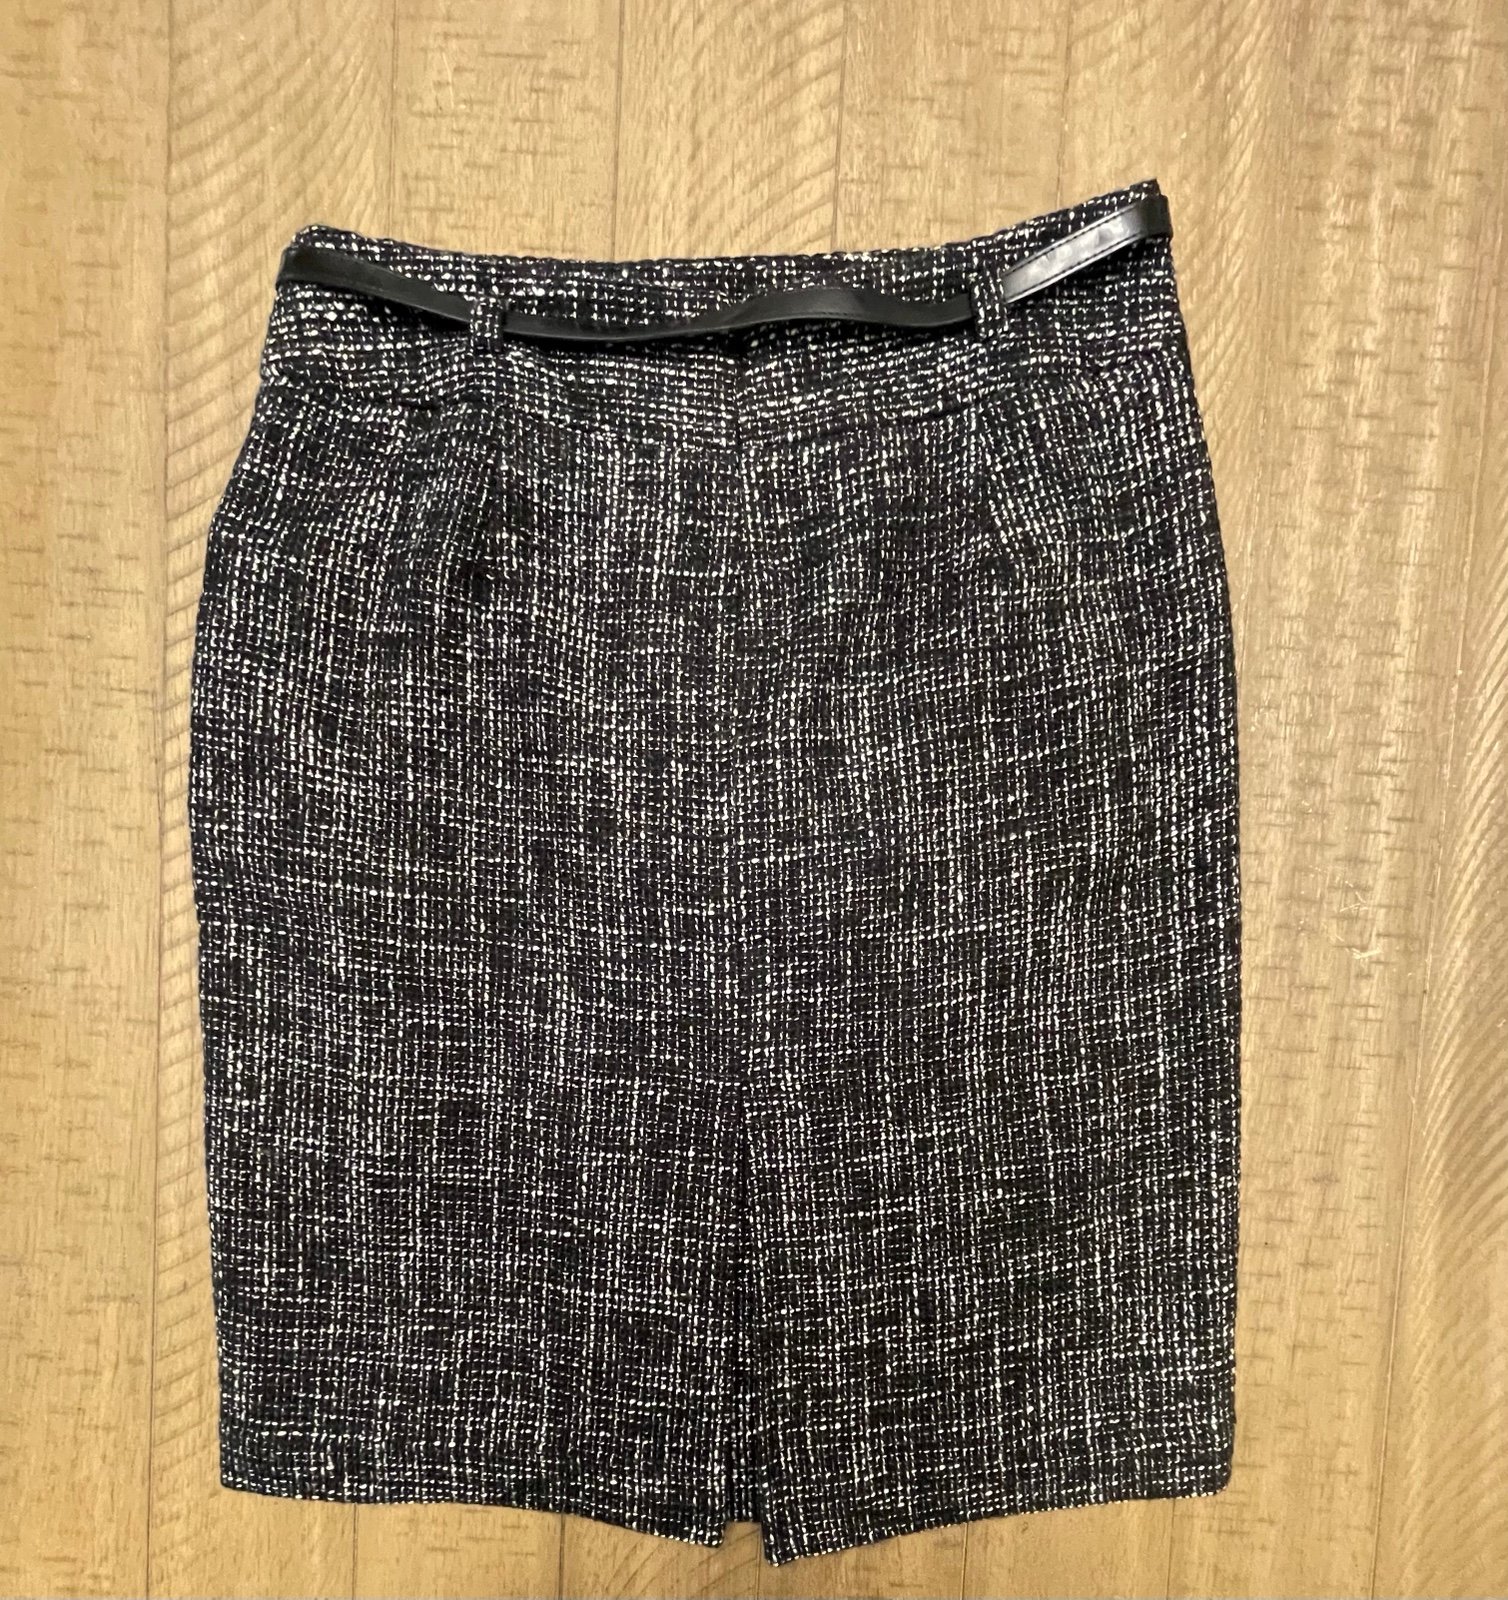 Exclusive Ann Taylor Loft Belted Pencil Skirt Size 6 pH349WXPK just buy it